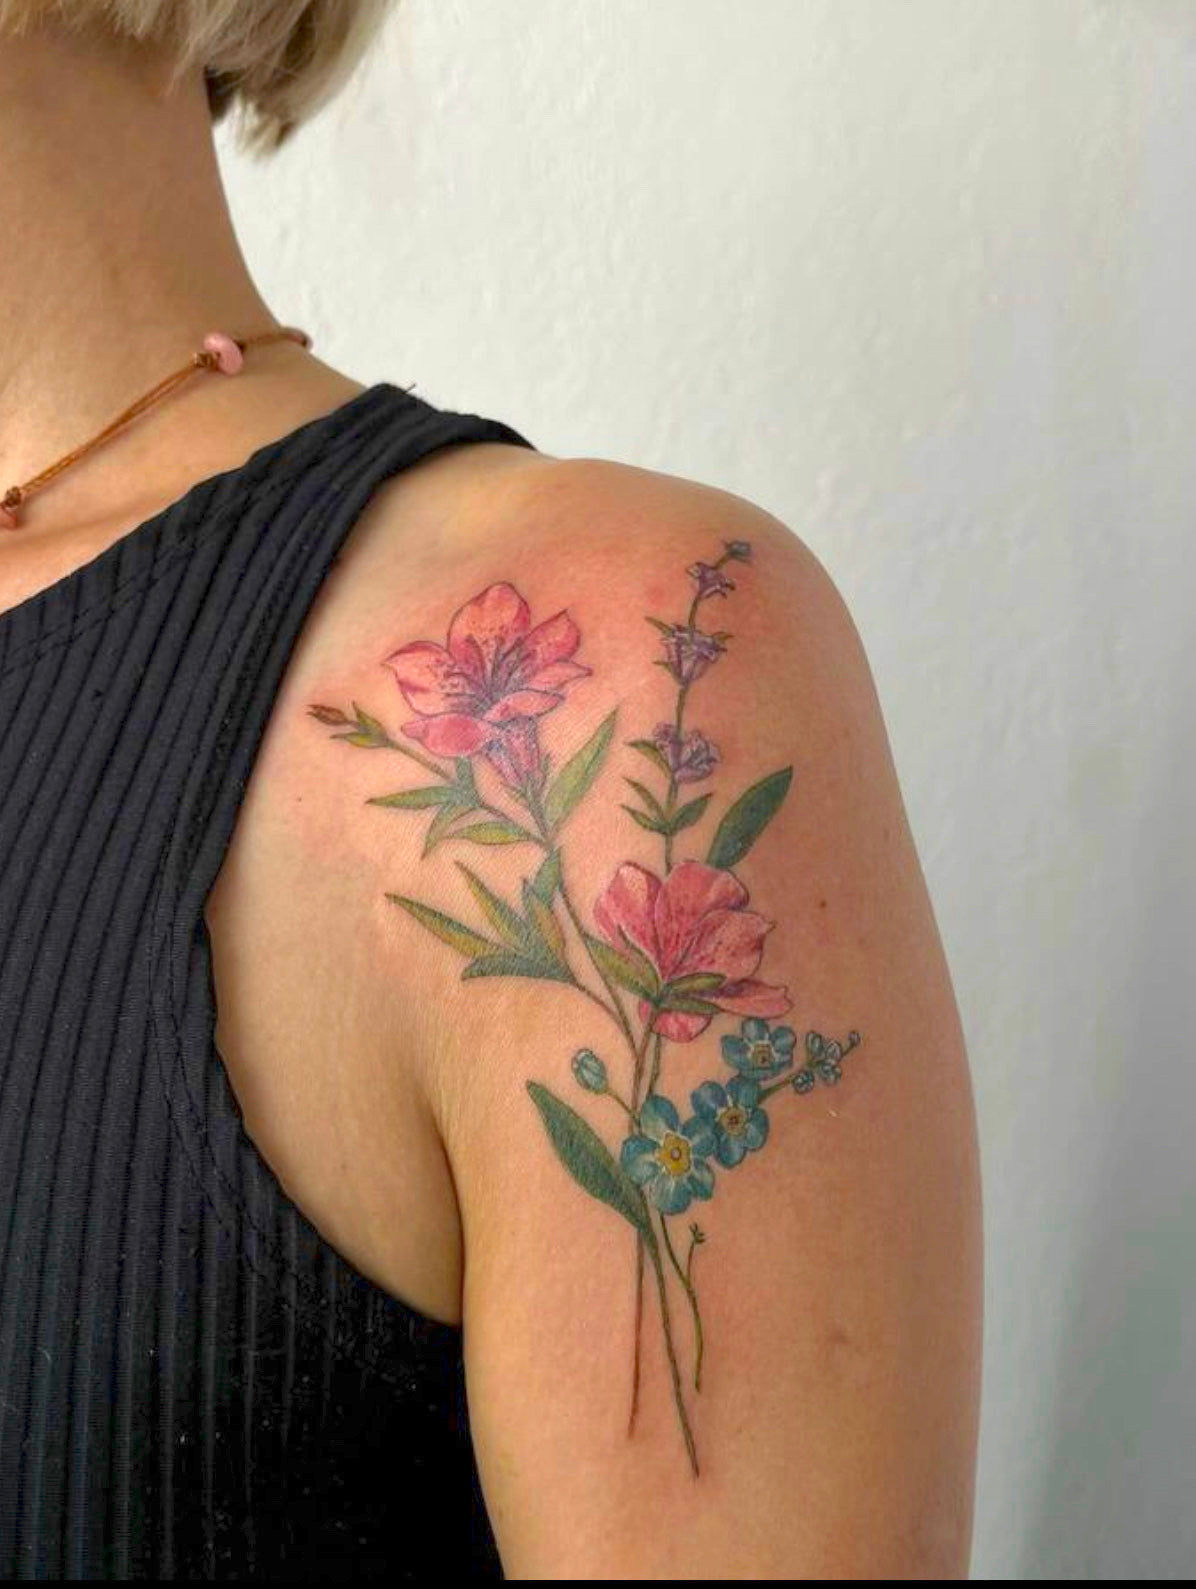 Tattoo Workshop "Full Color Botanical" with Macarena in Buenos Aires, Argentina